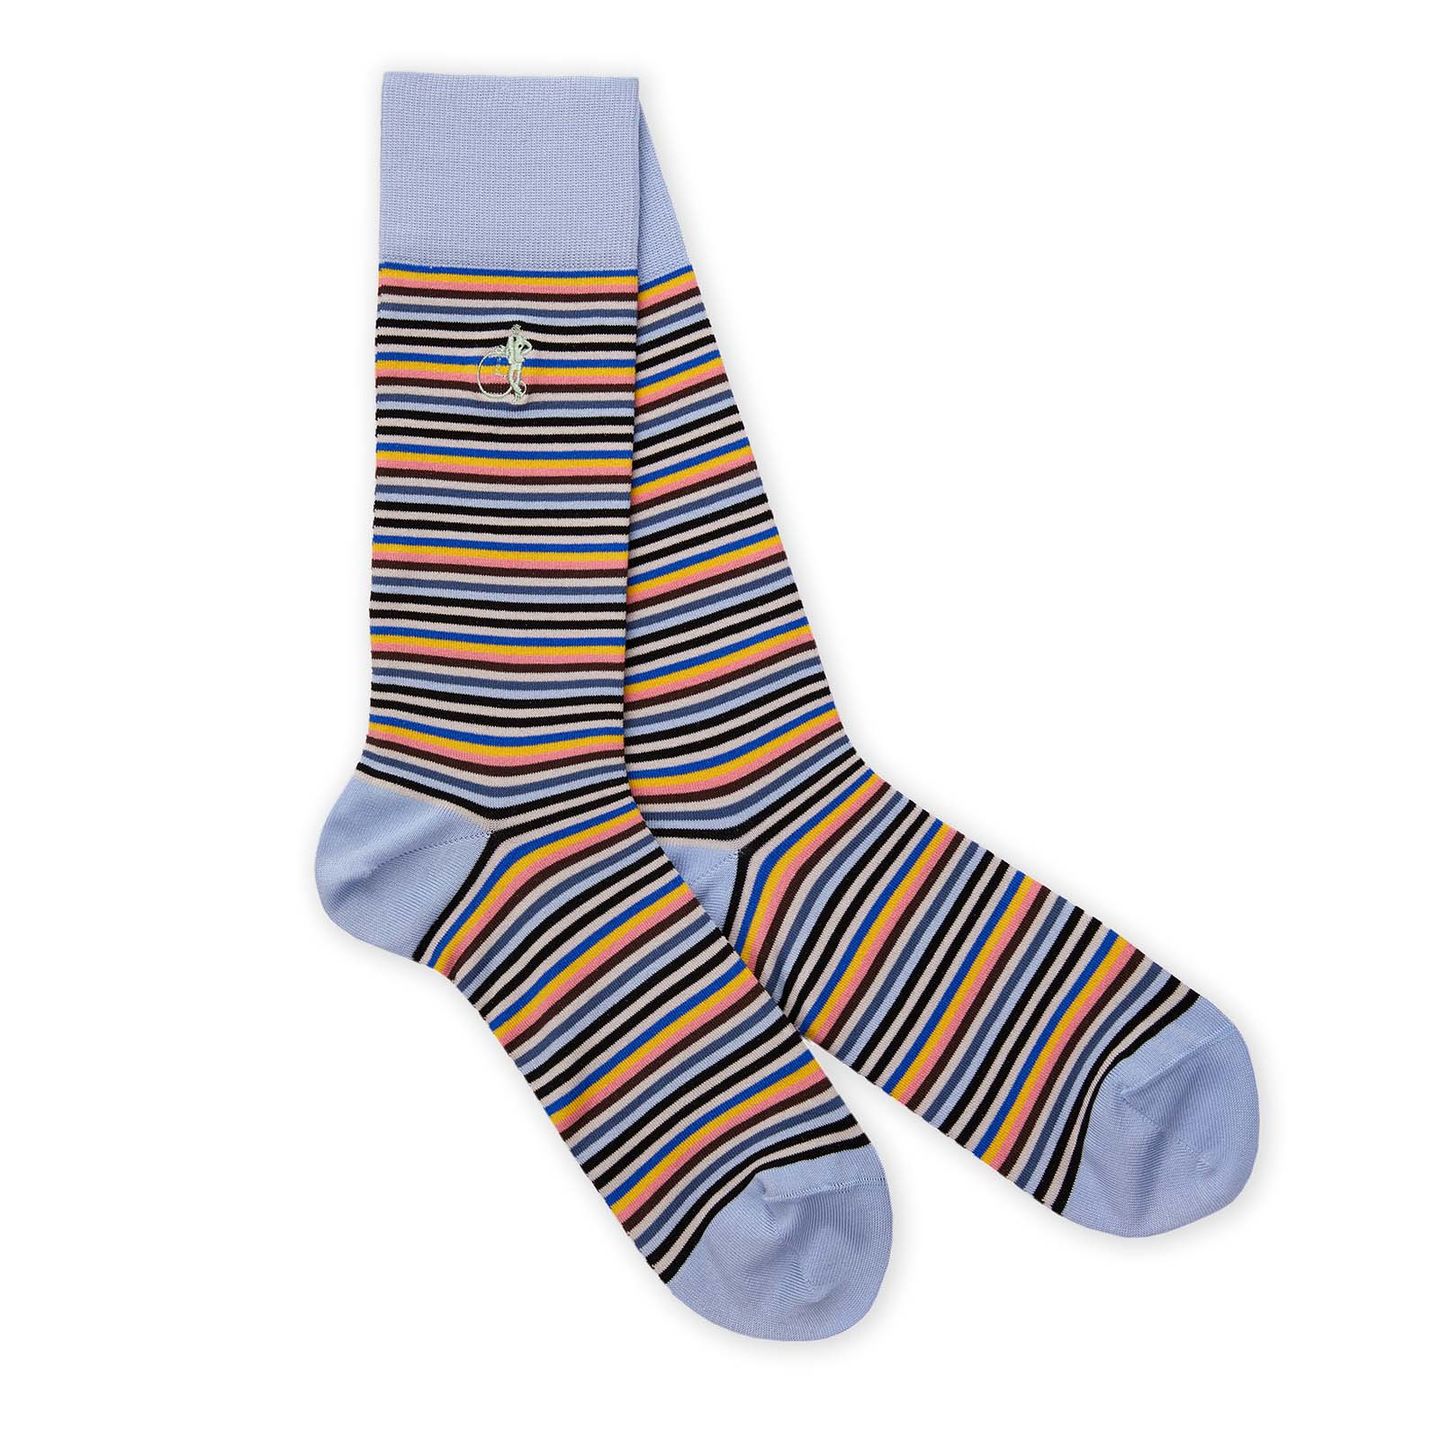 Close up of a light blue stripped socks, with 3 different blue hues, yellow, black, white stripes